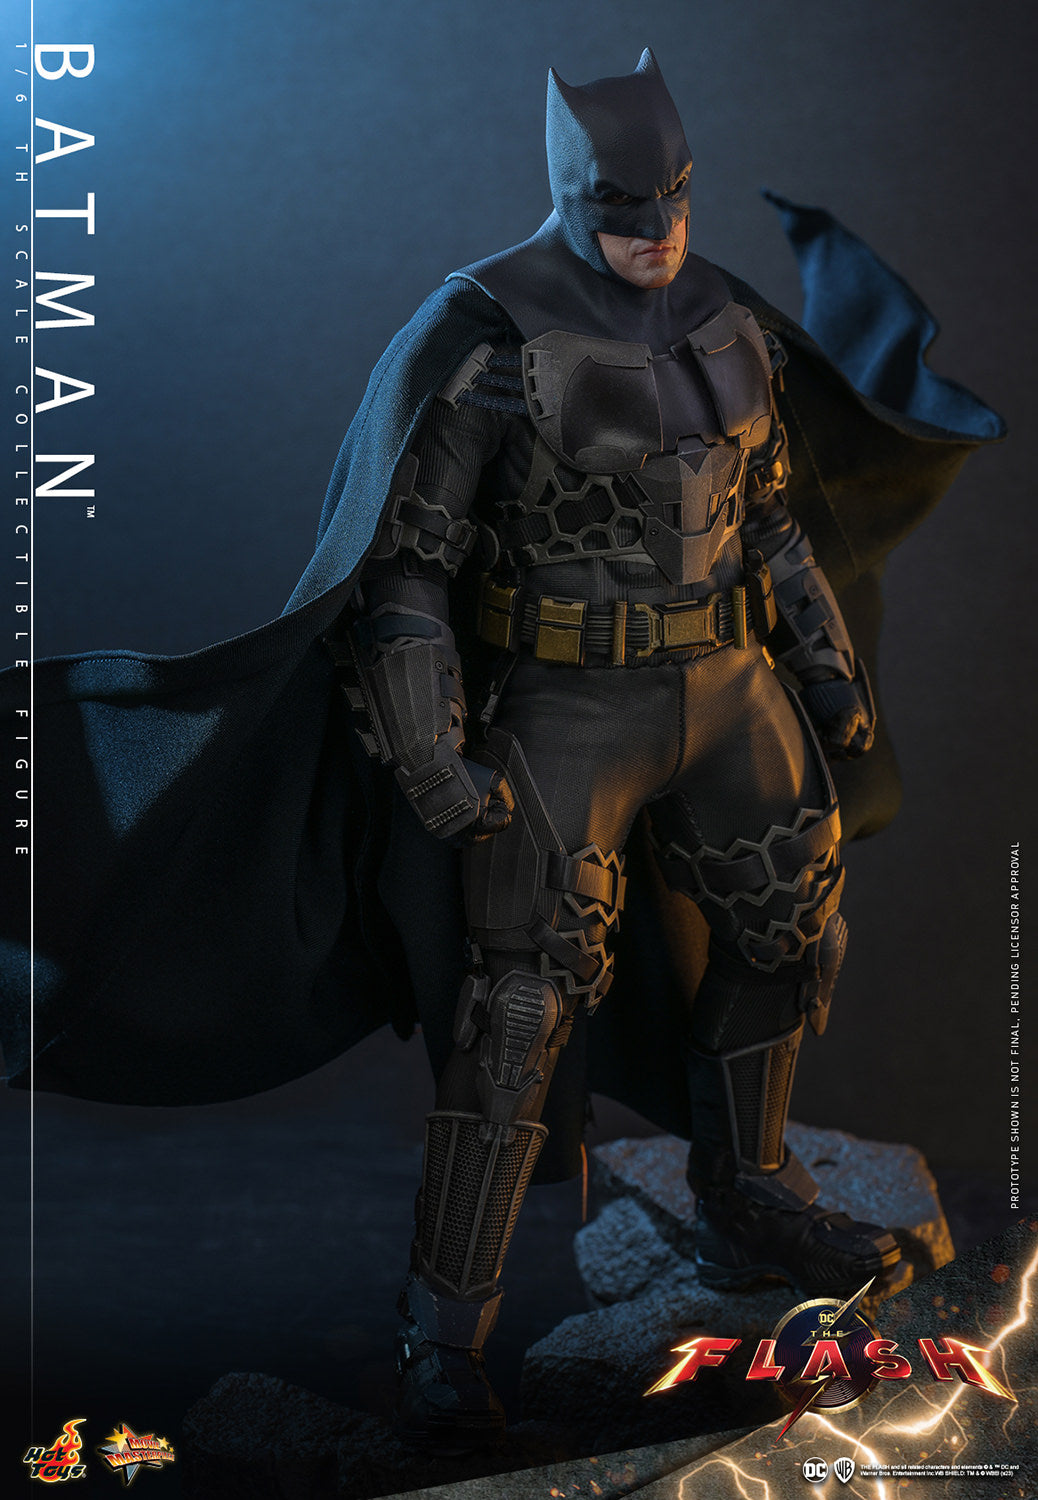 Batman Sixth Scale Figure by Hot Toys